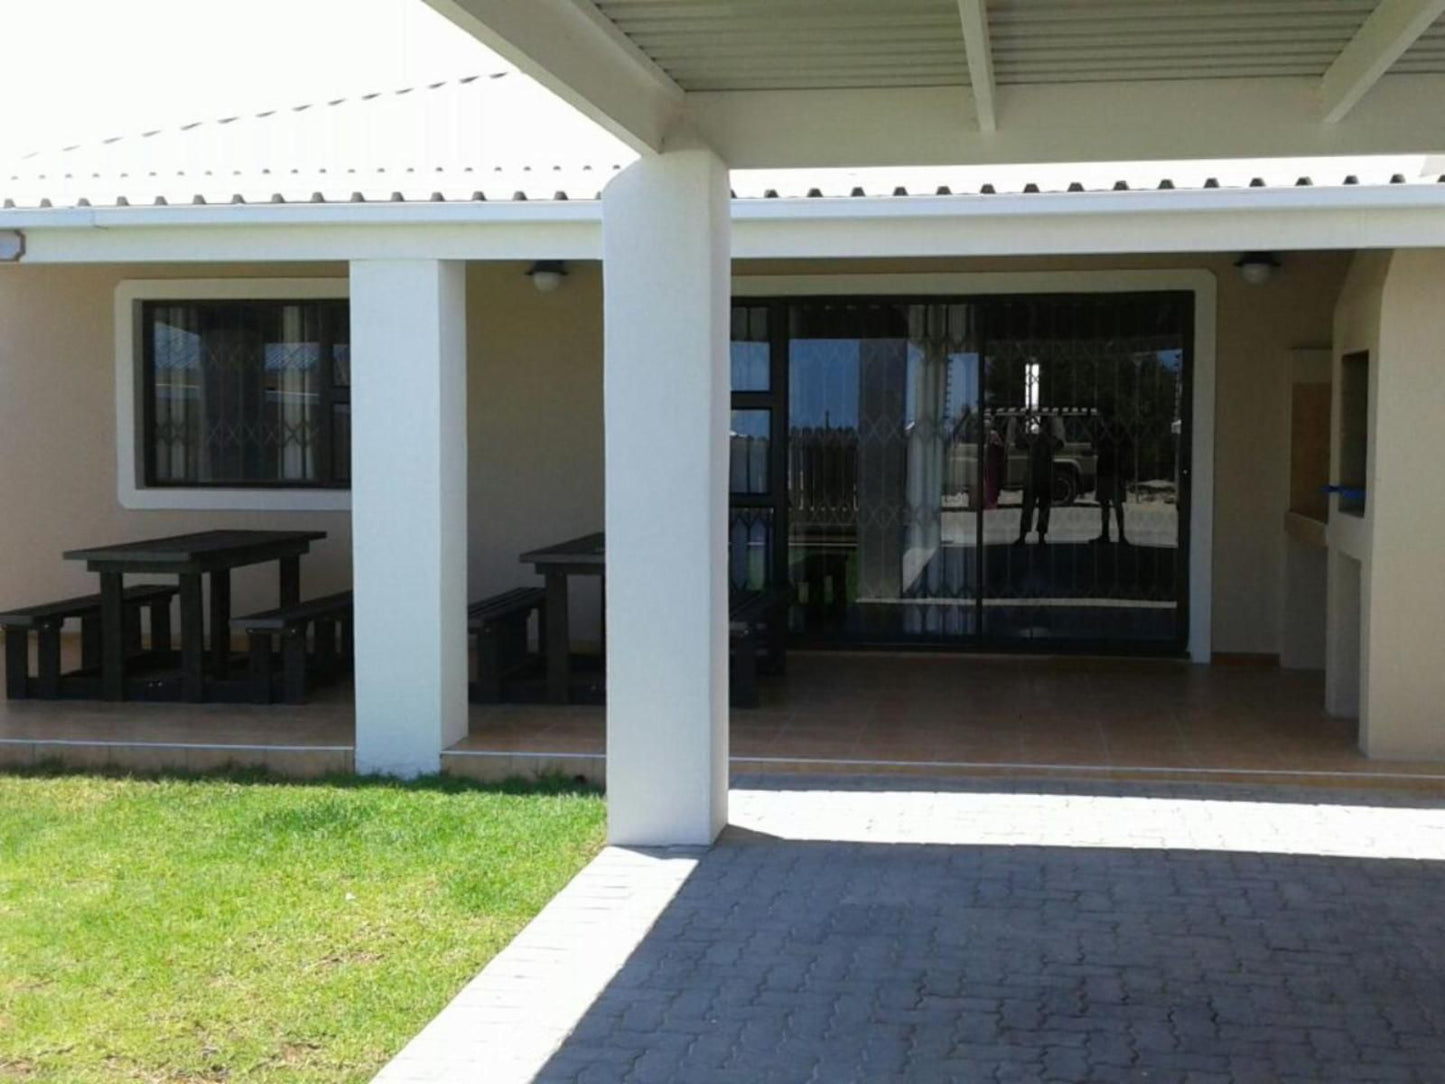 Seaside Self Catering Mcdougall S Bay Port Nolloth Northern Cape South Africa House, Building, Architecture